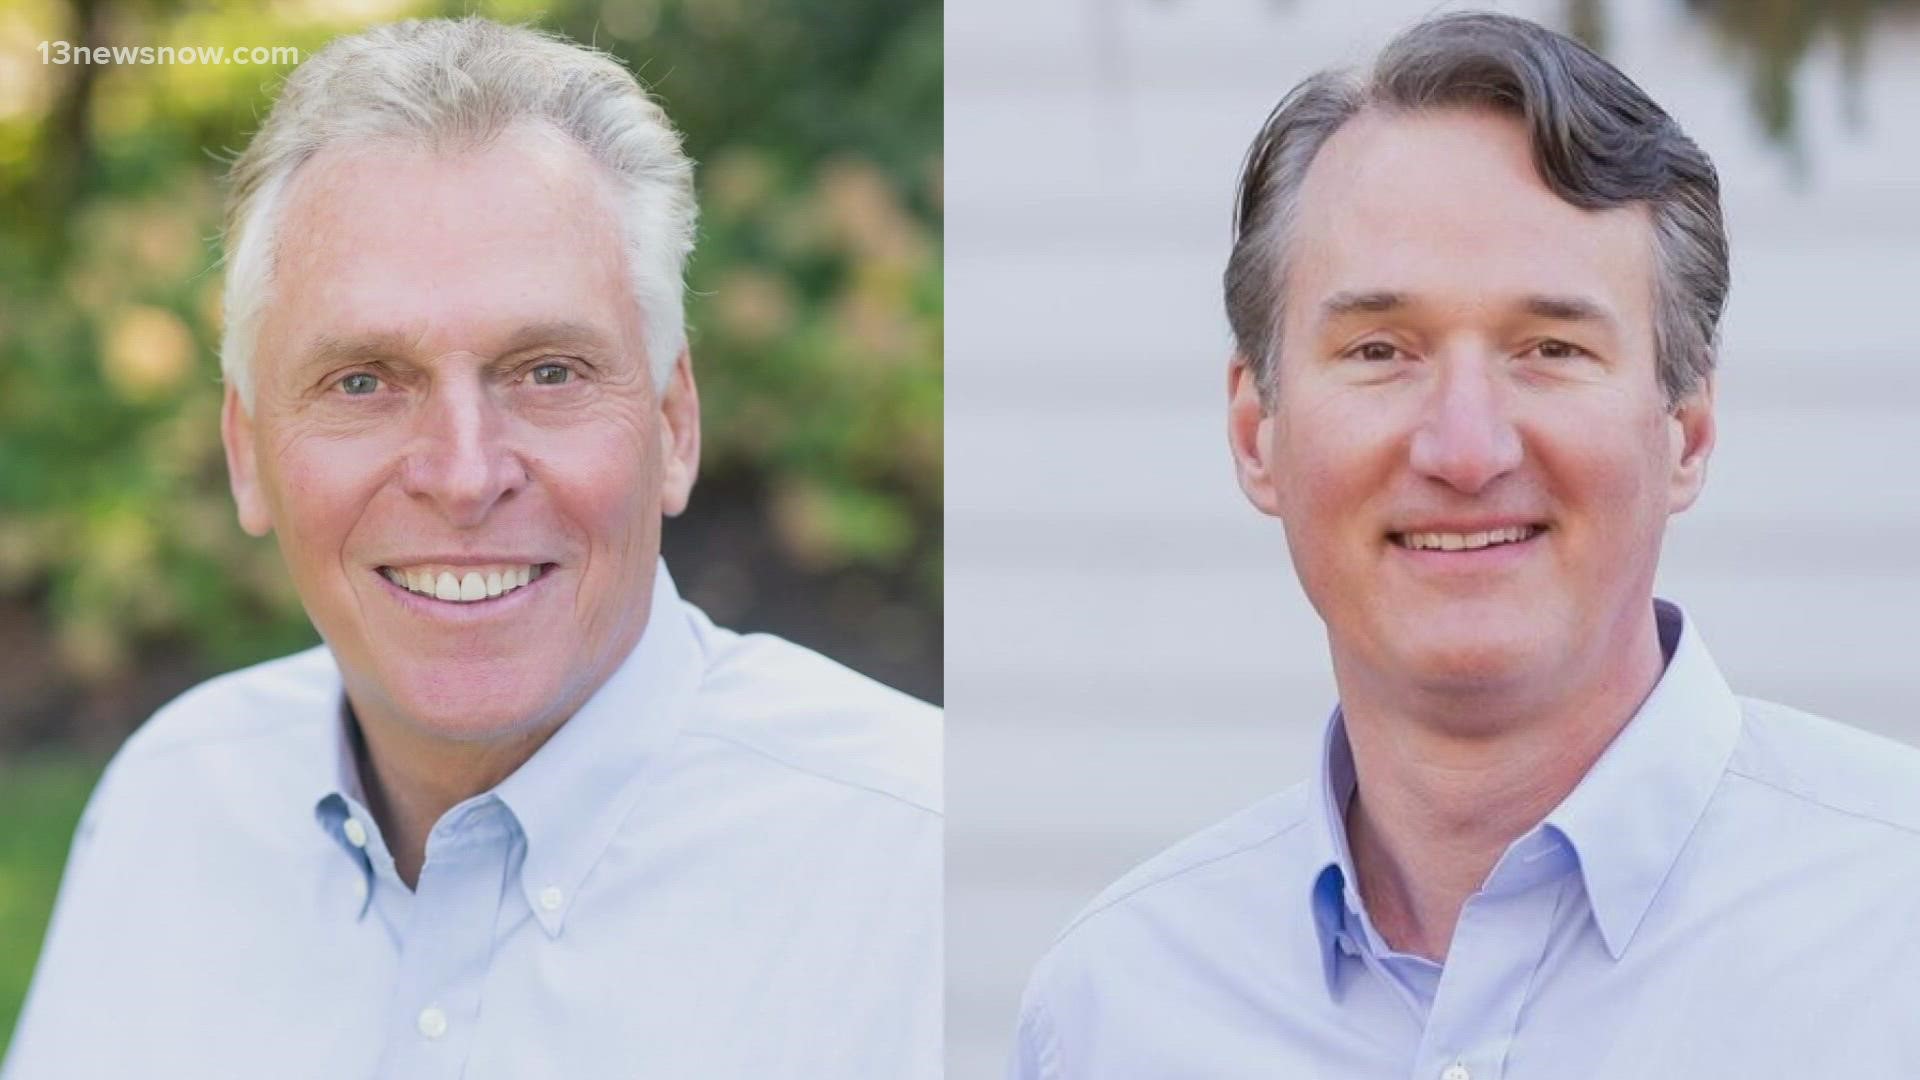 Terry McAuliffe and Glenn Youngkin have clashed over voter issues like vaccine mandates, the economy and abortion.